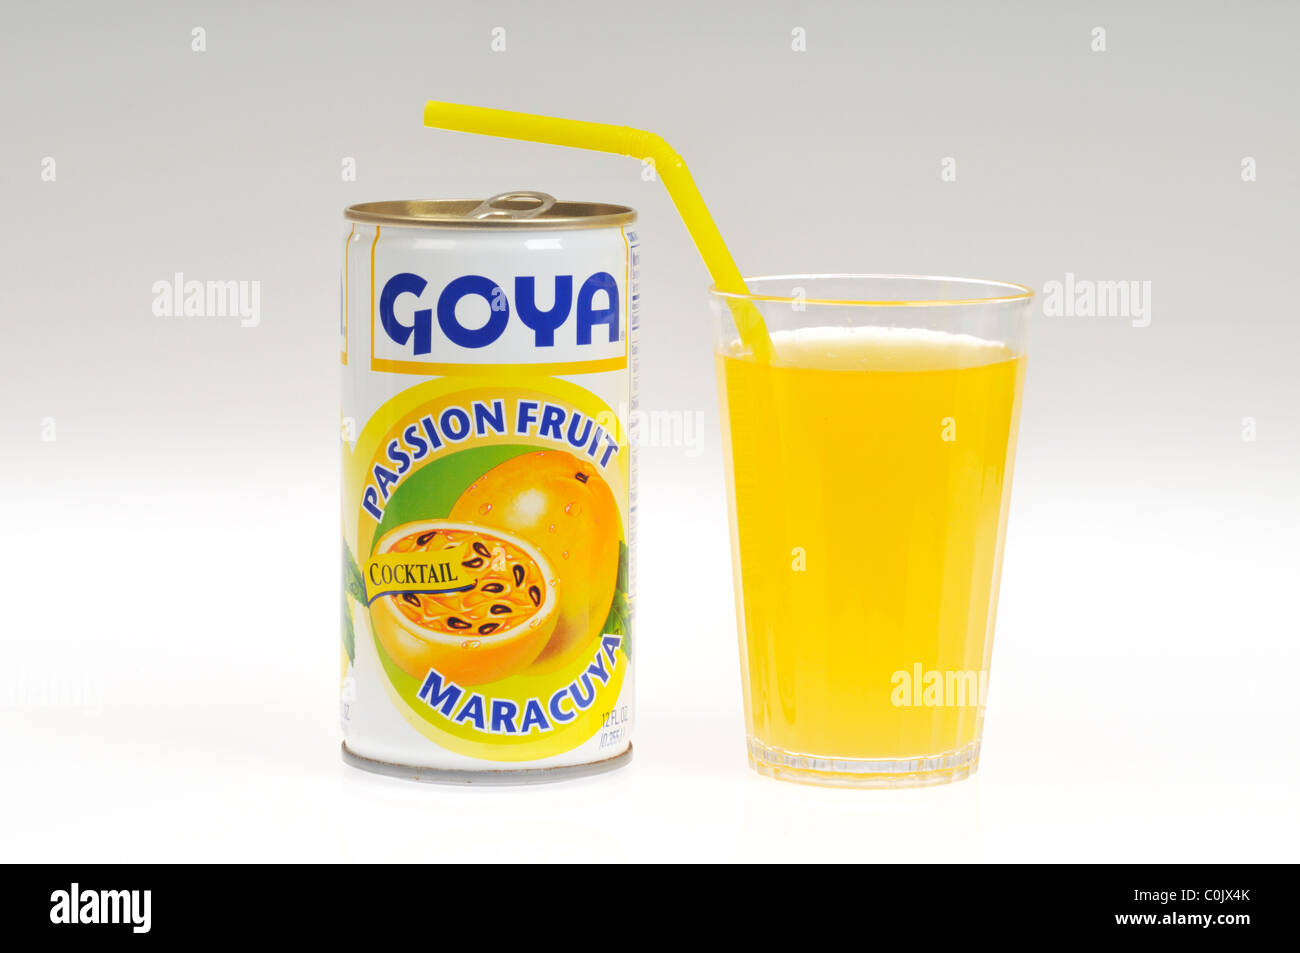 Can of Goya passion fruit cocktail with poured glass with straw on white background, isolated Stock Photo